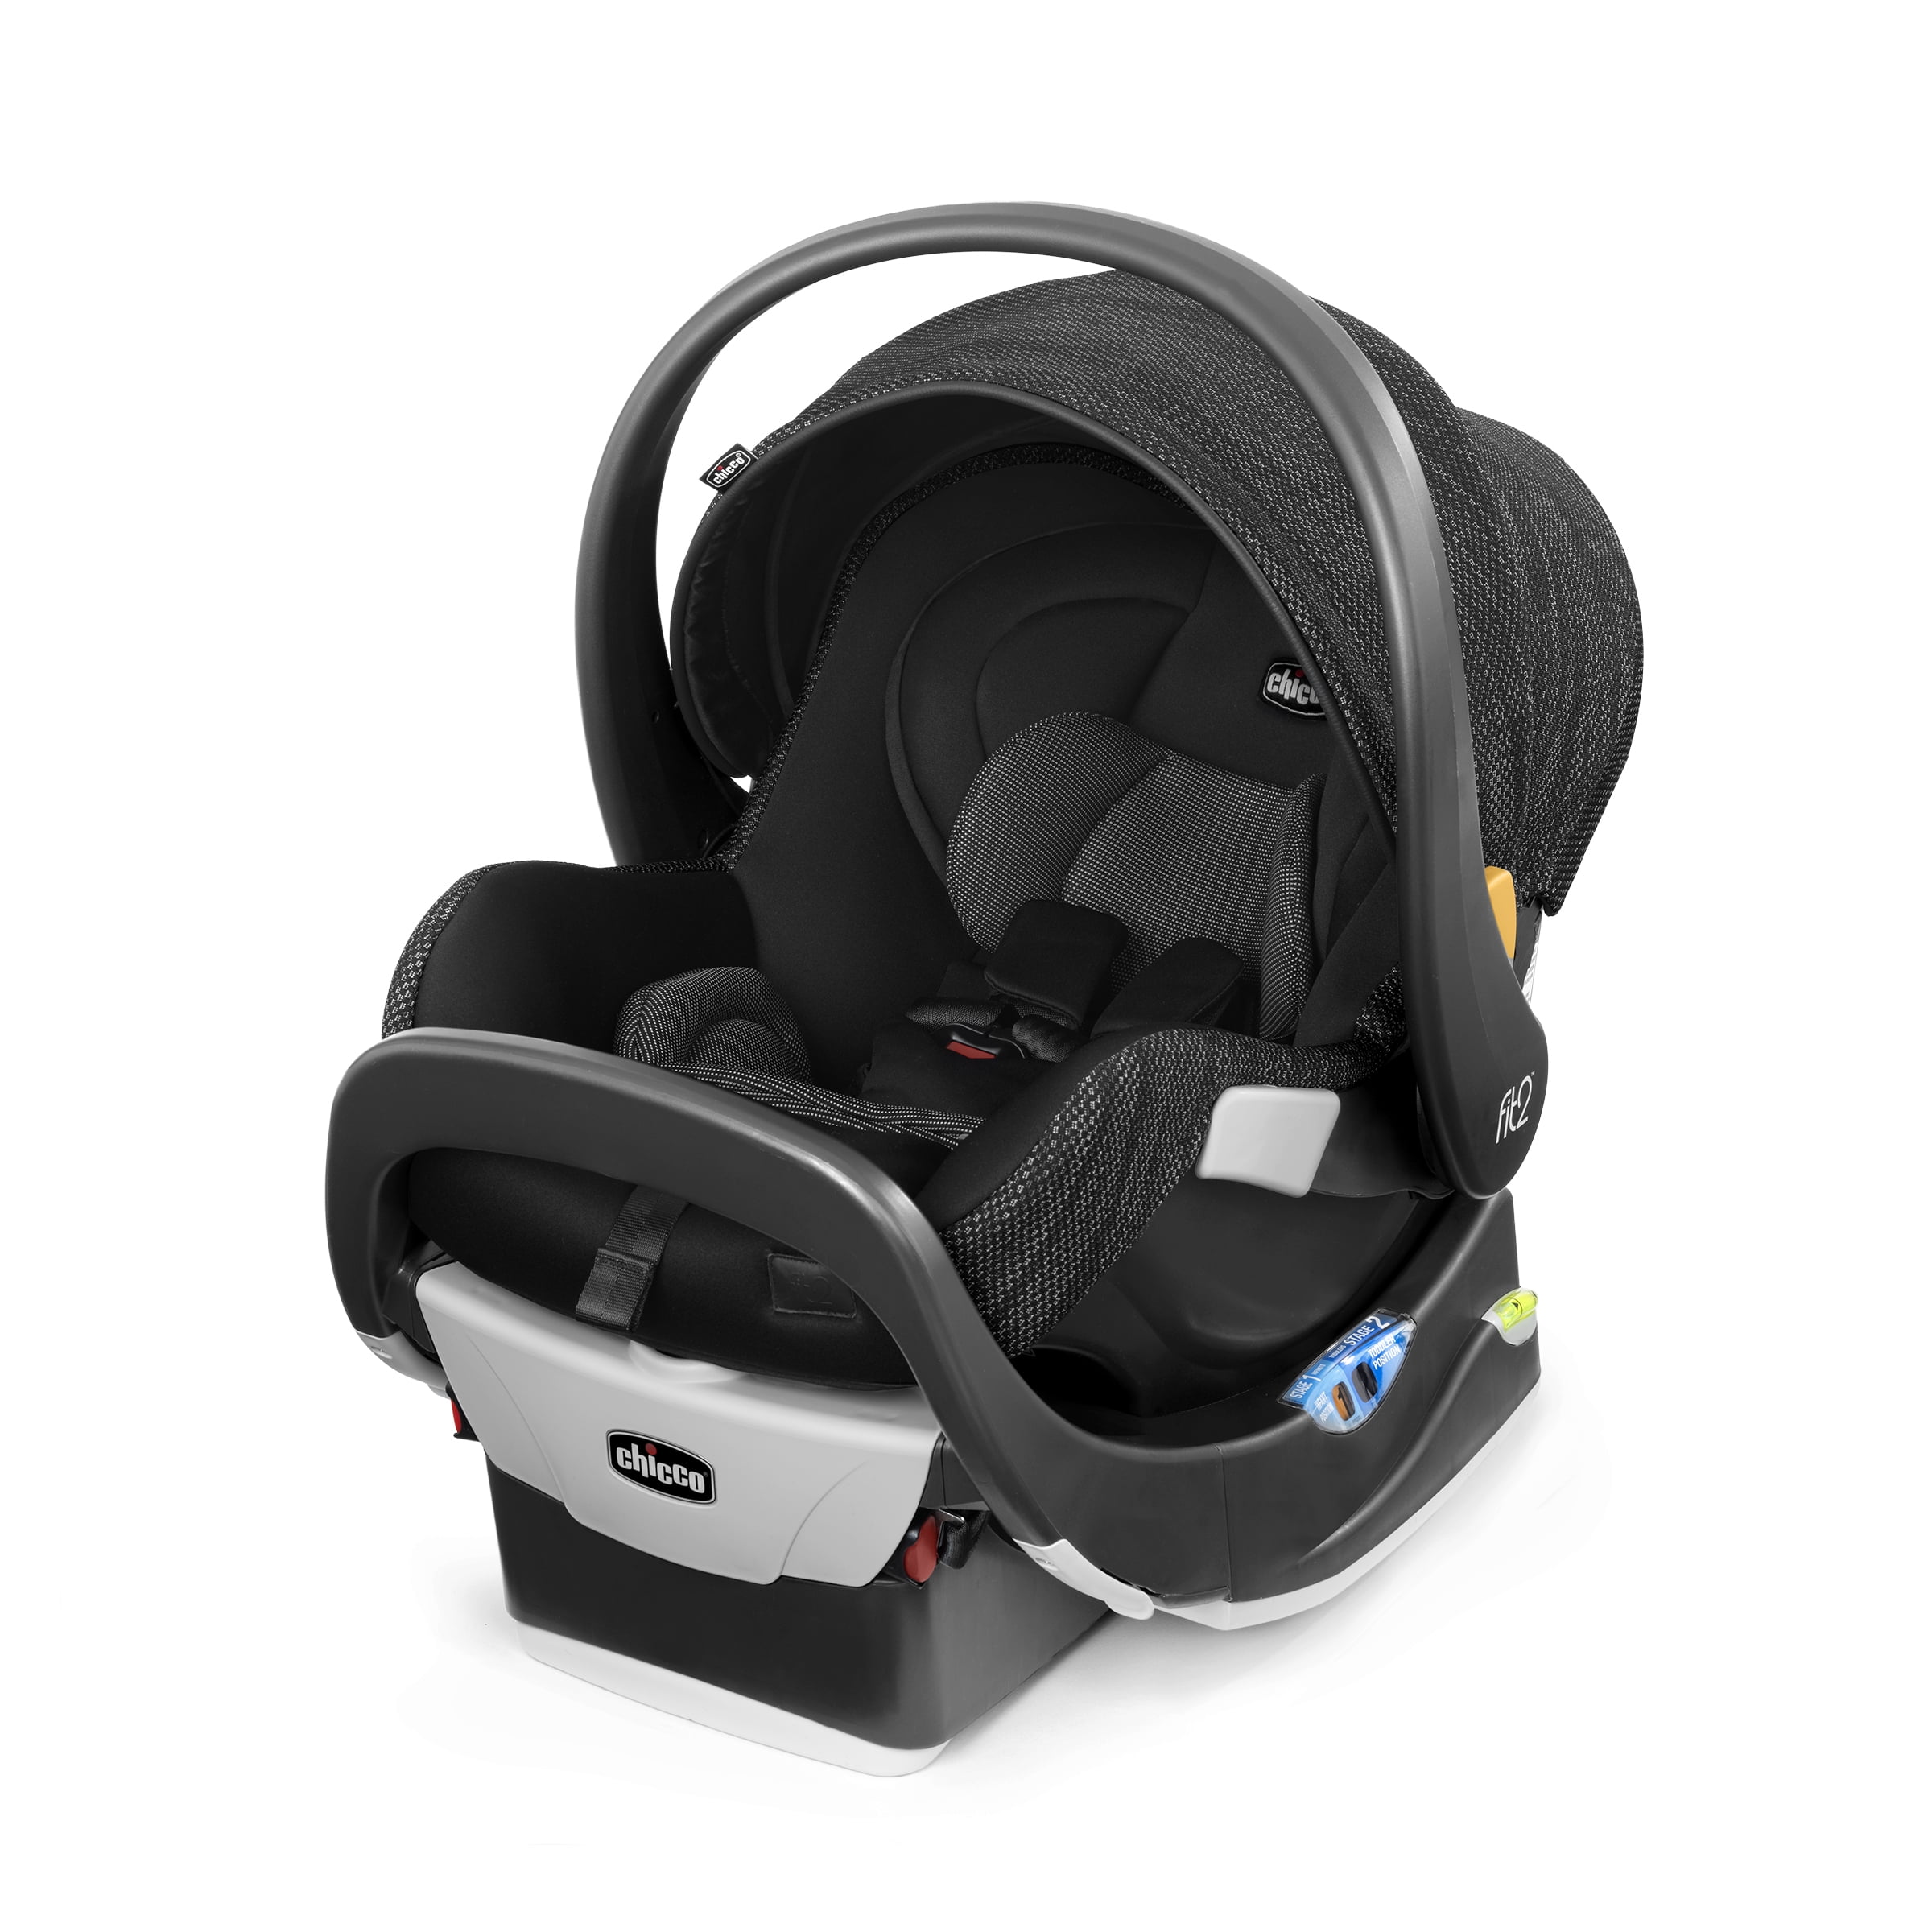 Chicco Fit2 35 lbs Infant & Toddler Car Seat - Staccato (Black ...